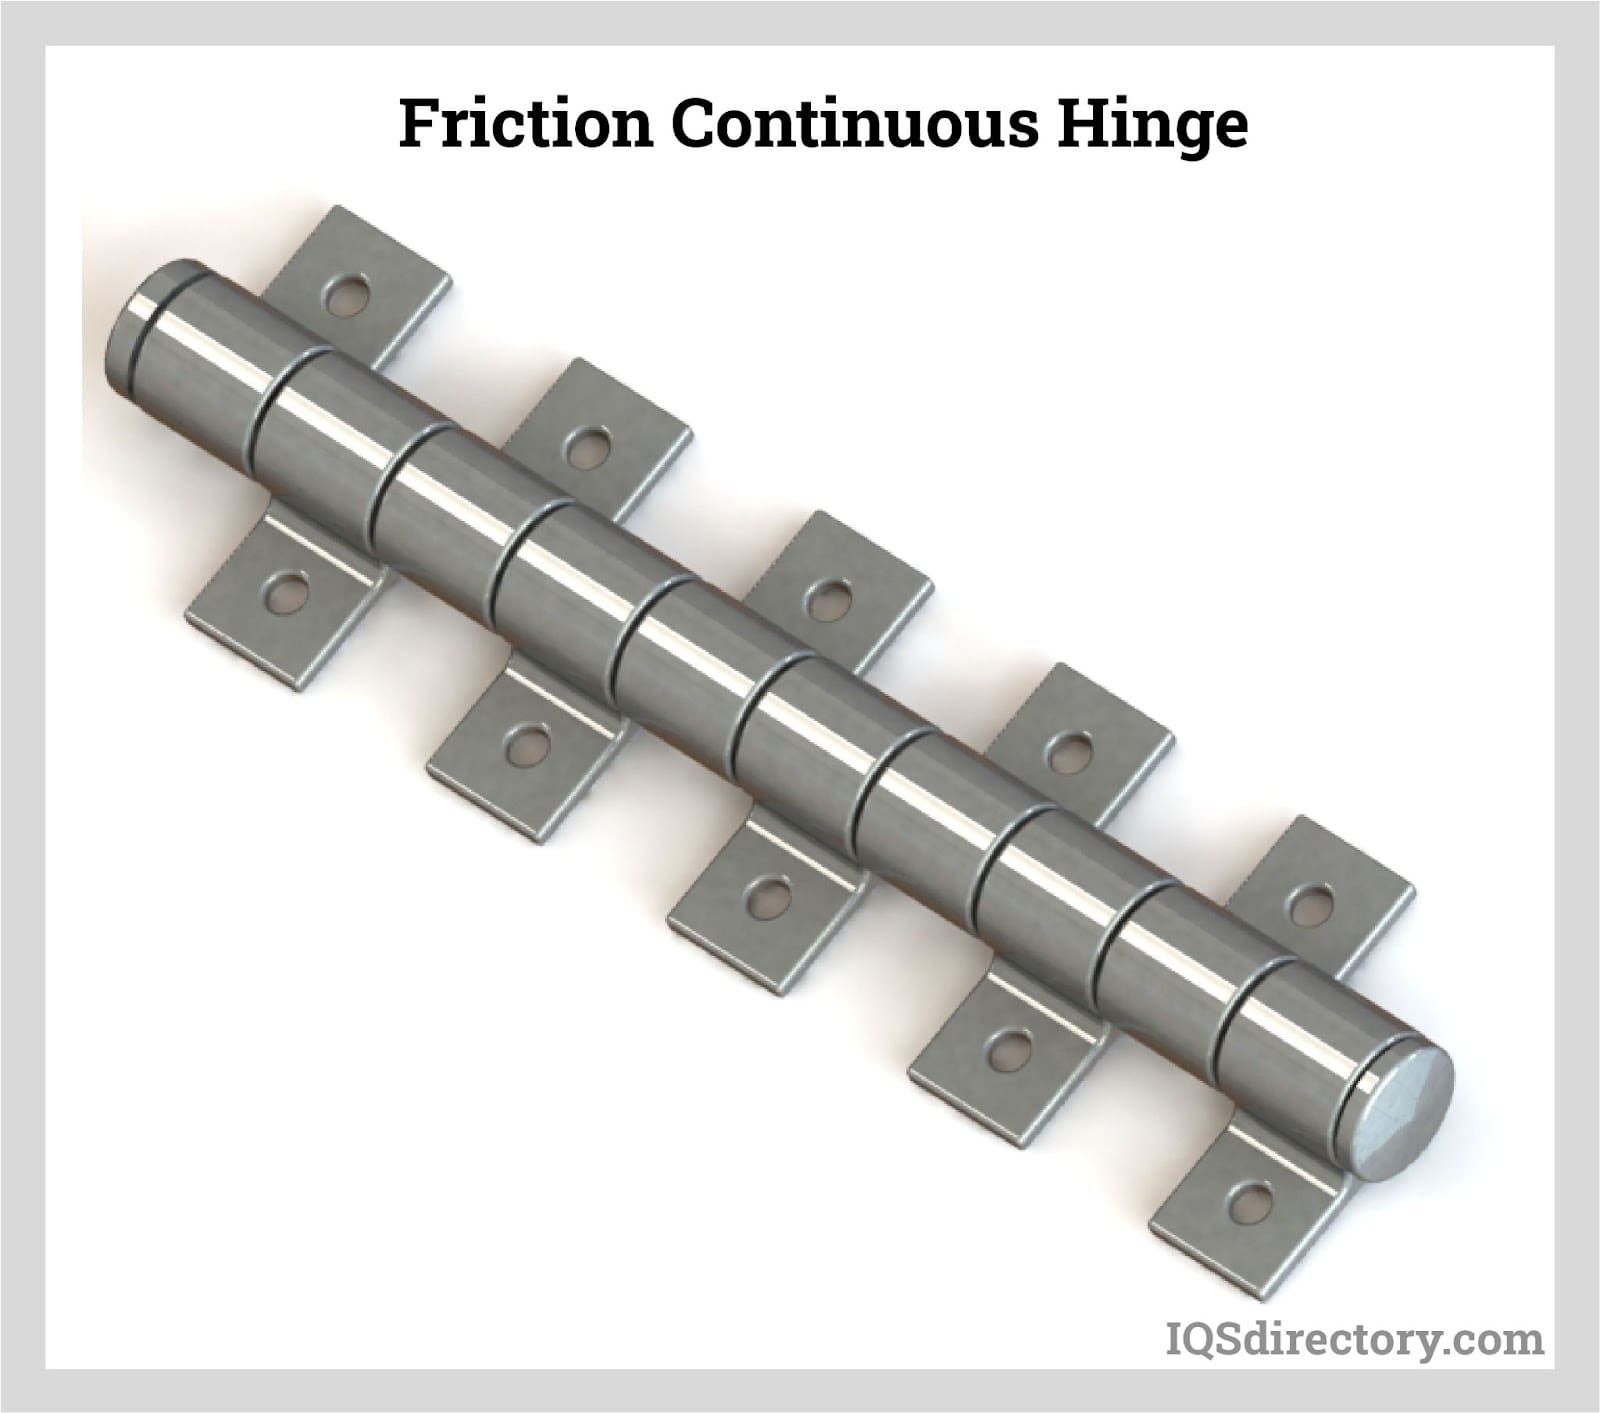 Friction Continuous Hinge